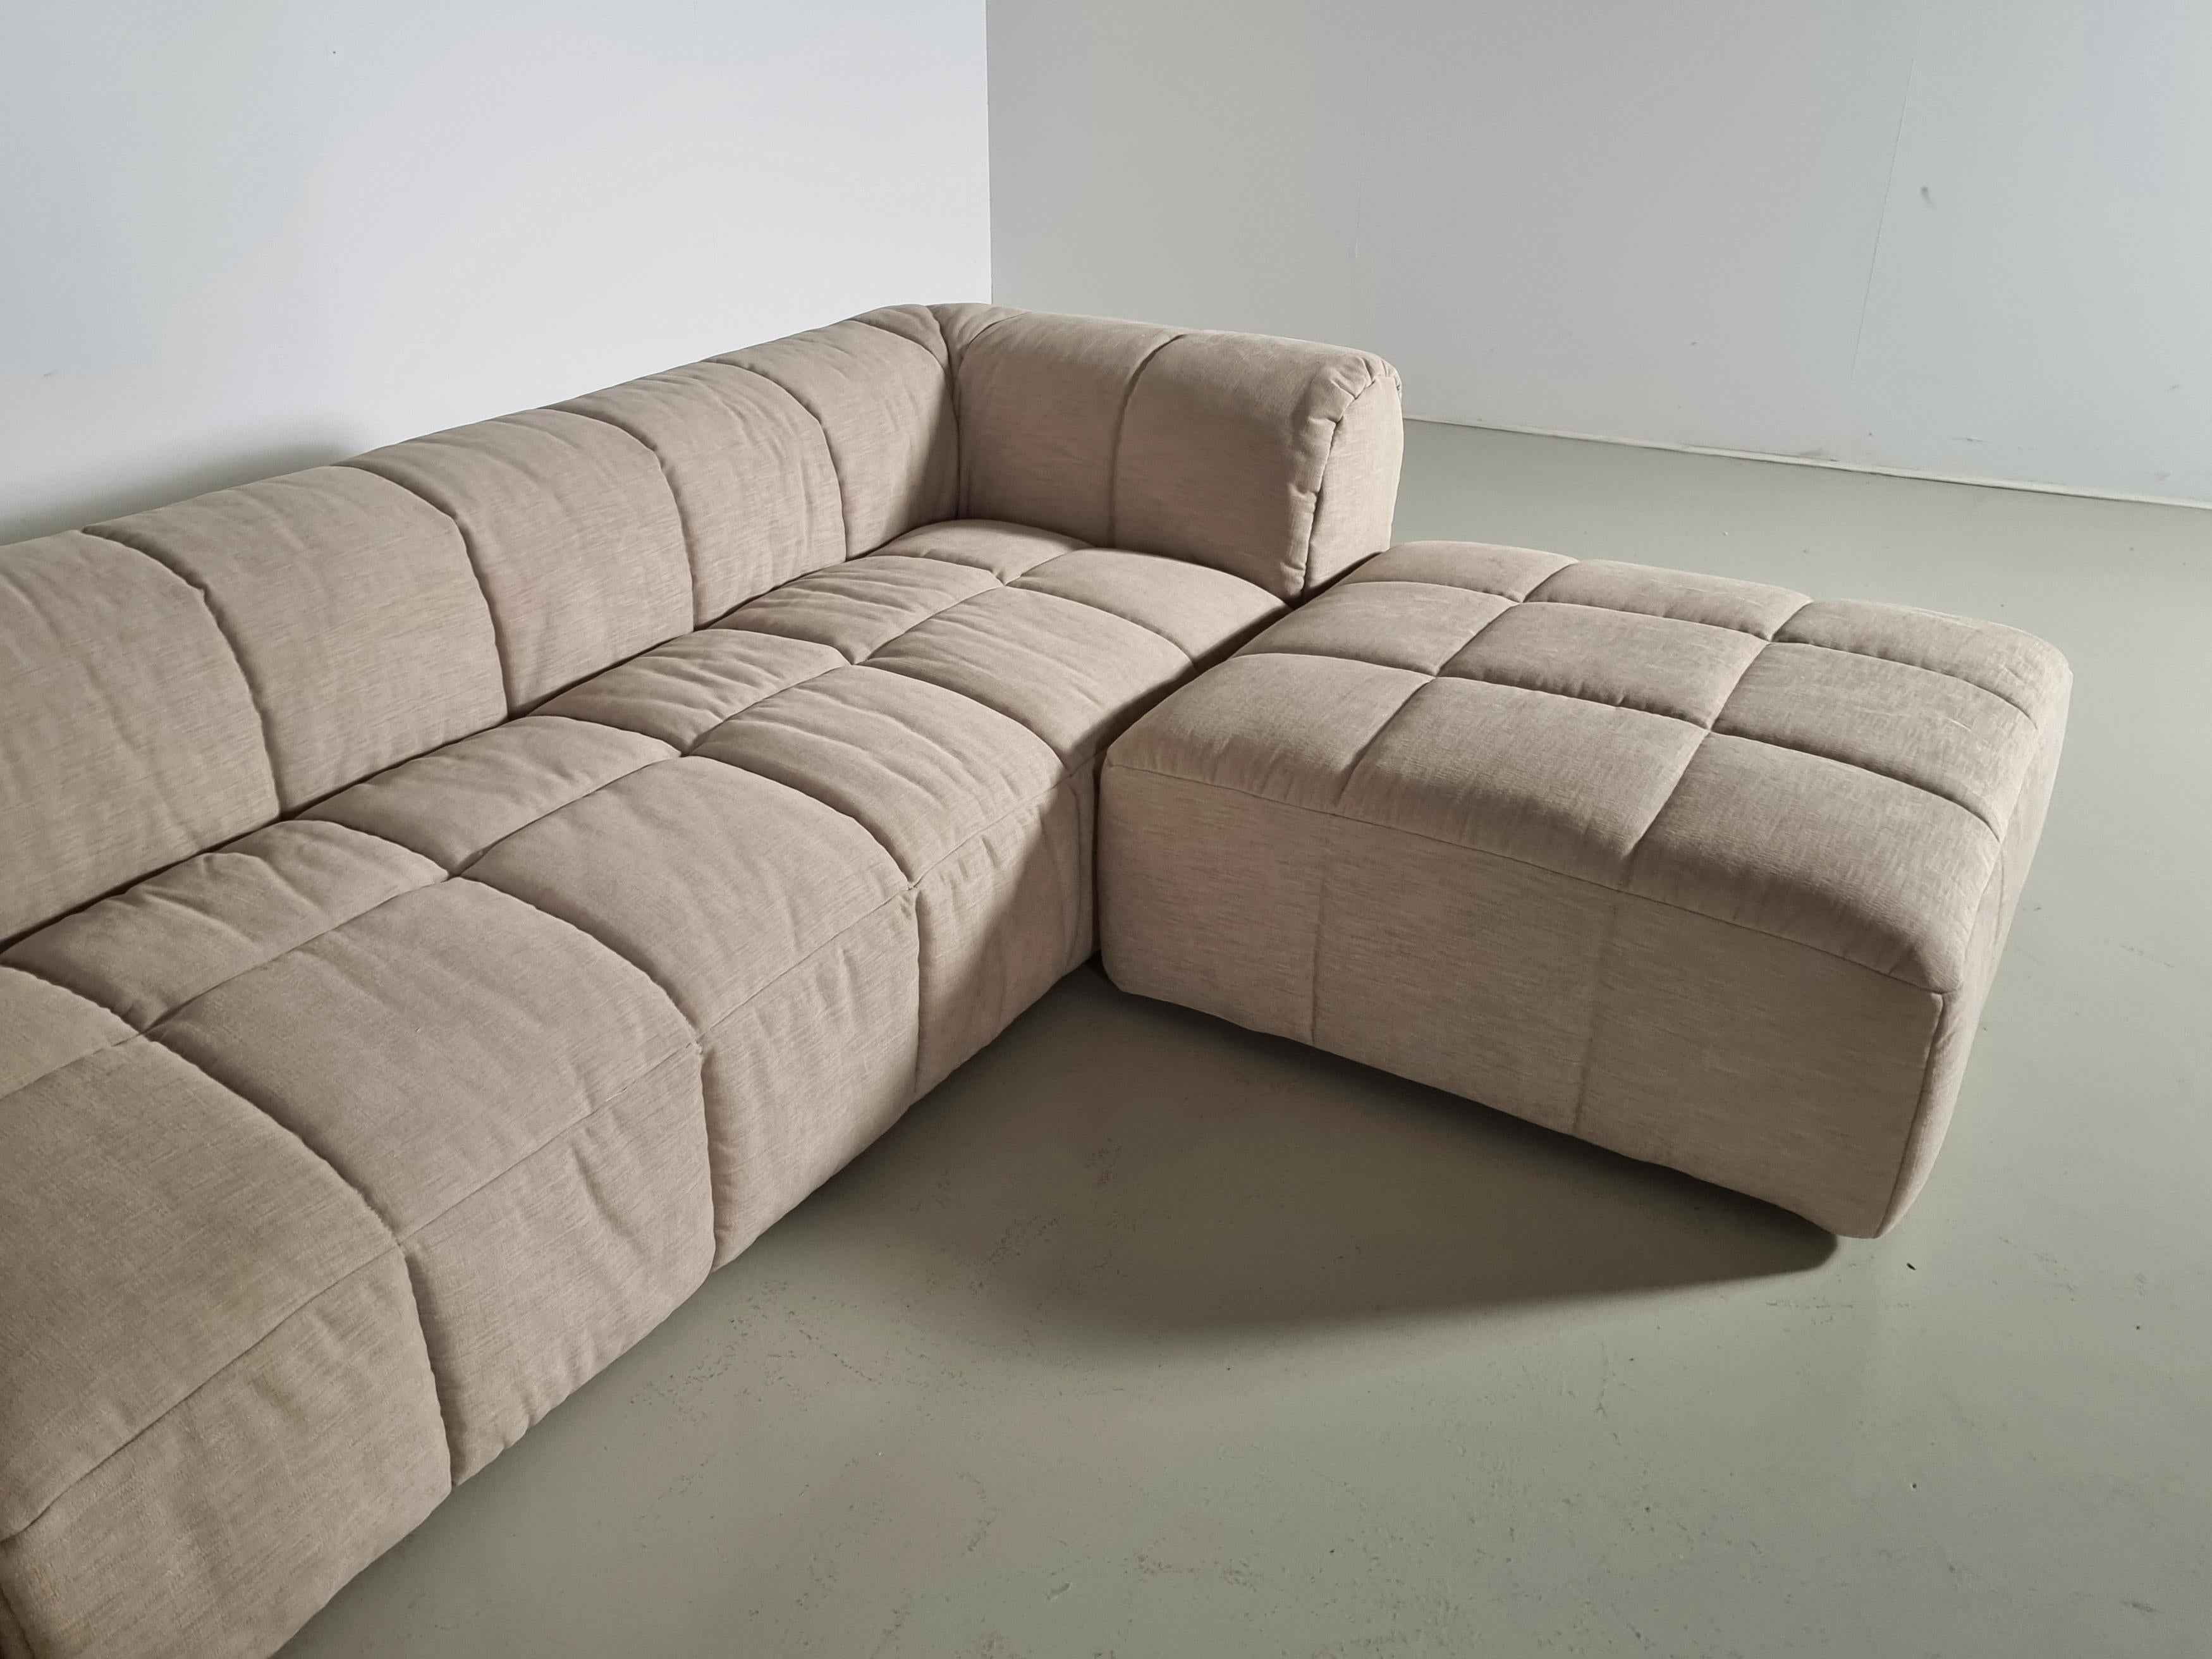 Strips Modular Sofa in cream stain resistant fabric by Cini Boeri for Arflex In Excellent Condition For Sale In amstelveen, NL